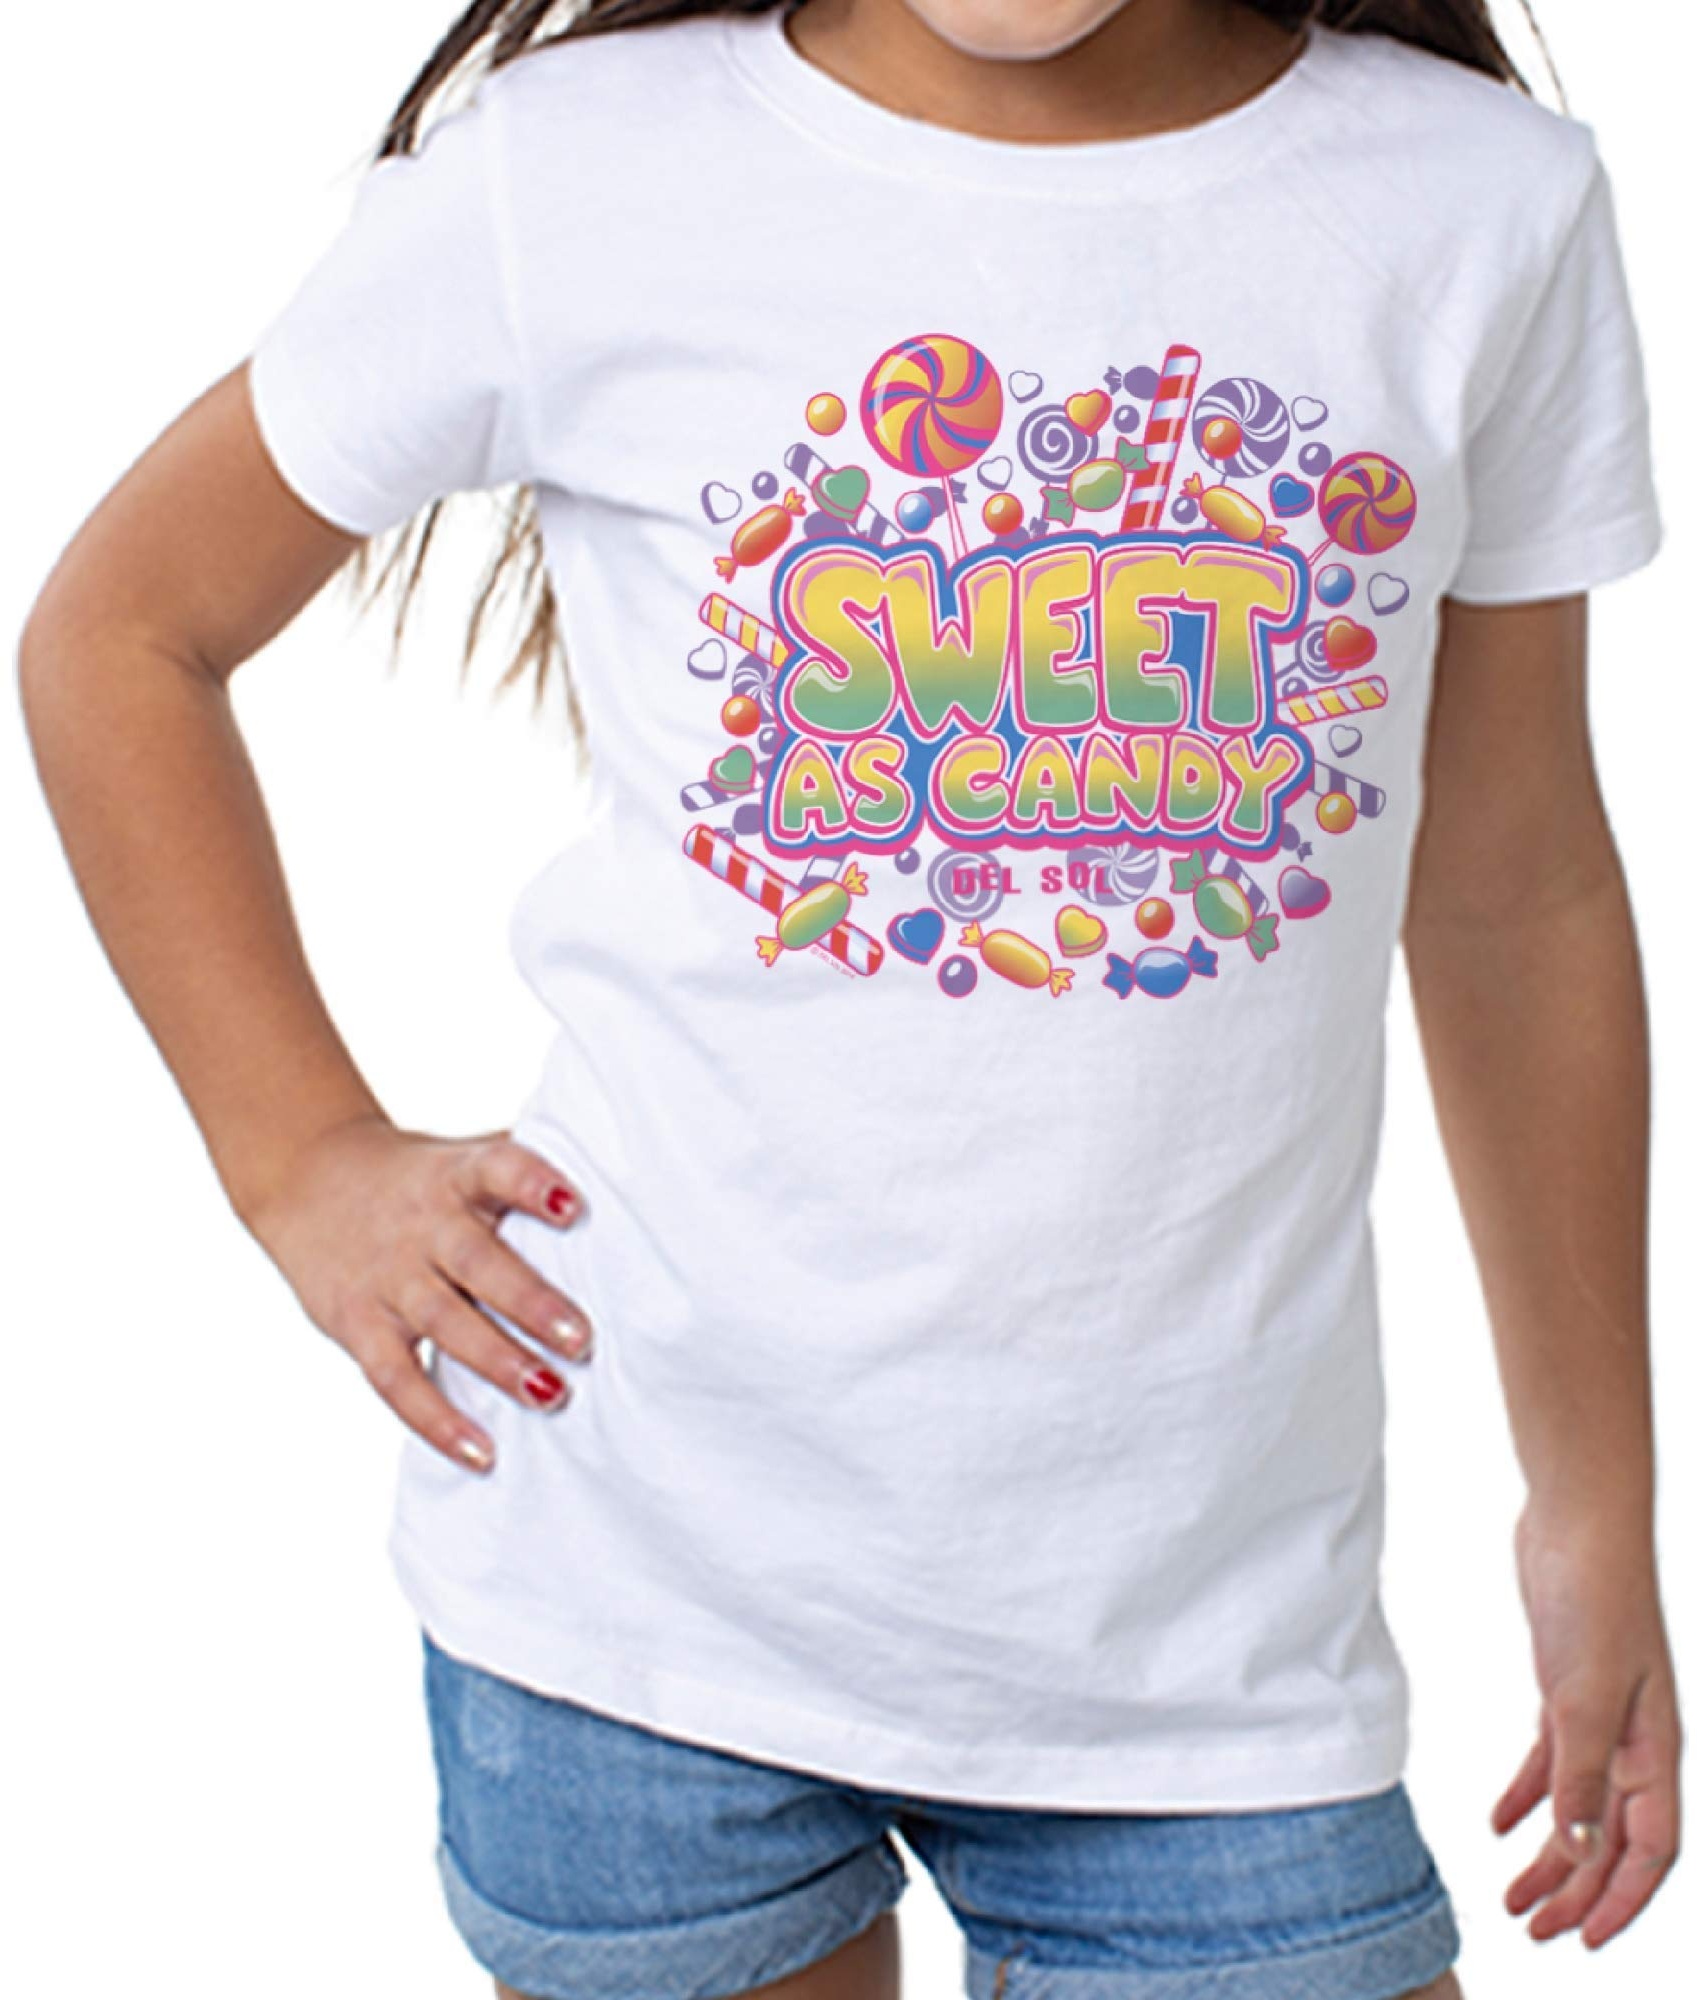 Del Sol Toddler Girls Crew Tee - Sweet as Candy, White T-Shirt - Changes from Pink to Vibrant Colors in The Sun - 100% Combed, Ring-Spun Cotton, Short Sleeve - Size 2T